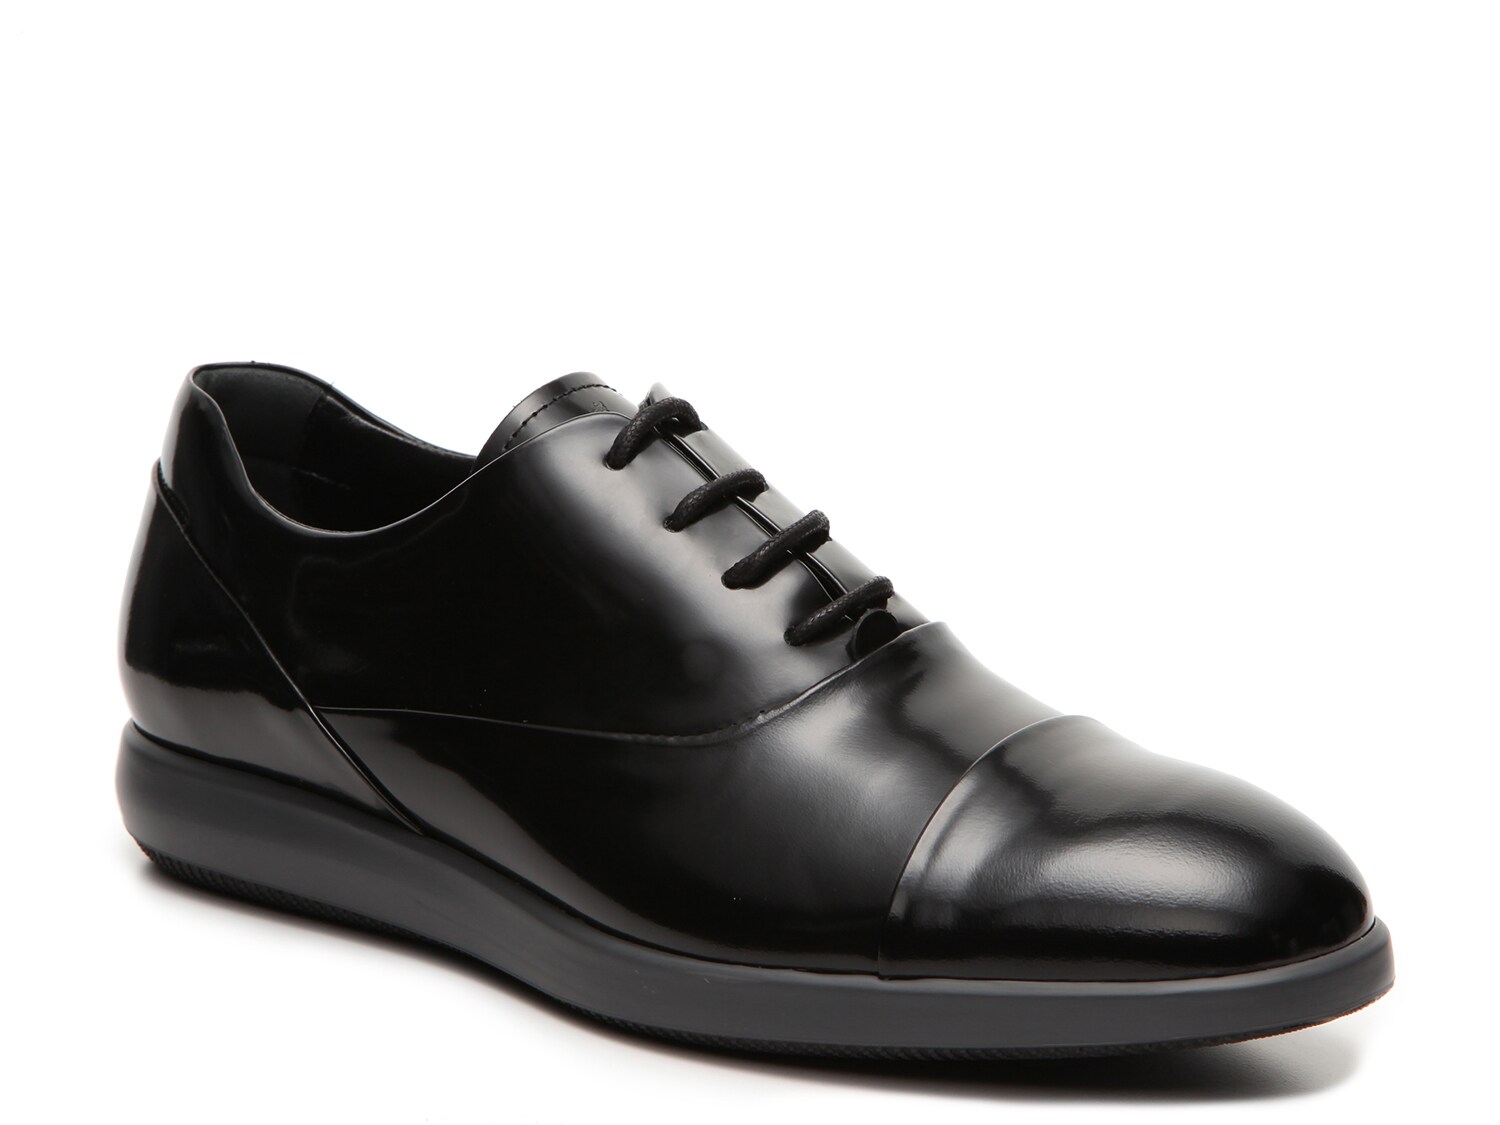 Hogan Patent Leather Cap Toe Oxford - Free Shipping | DSW